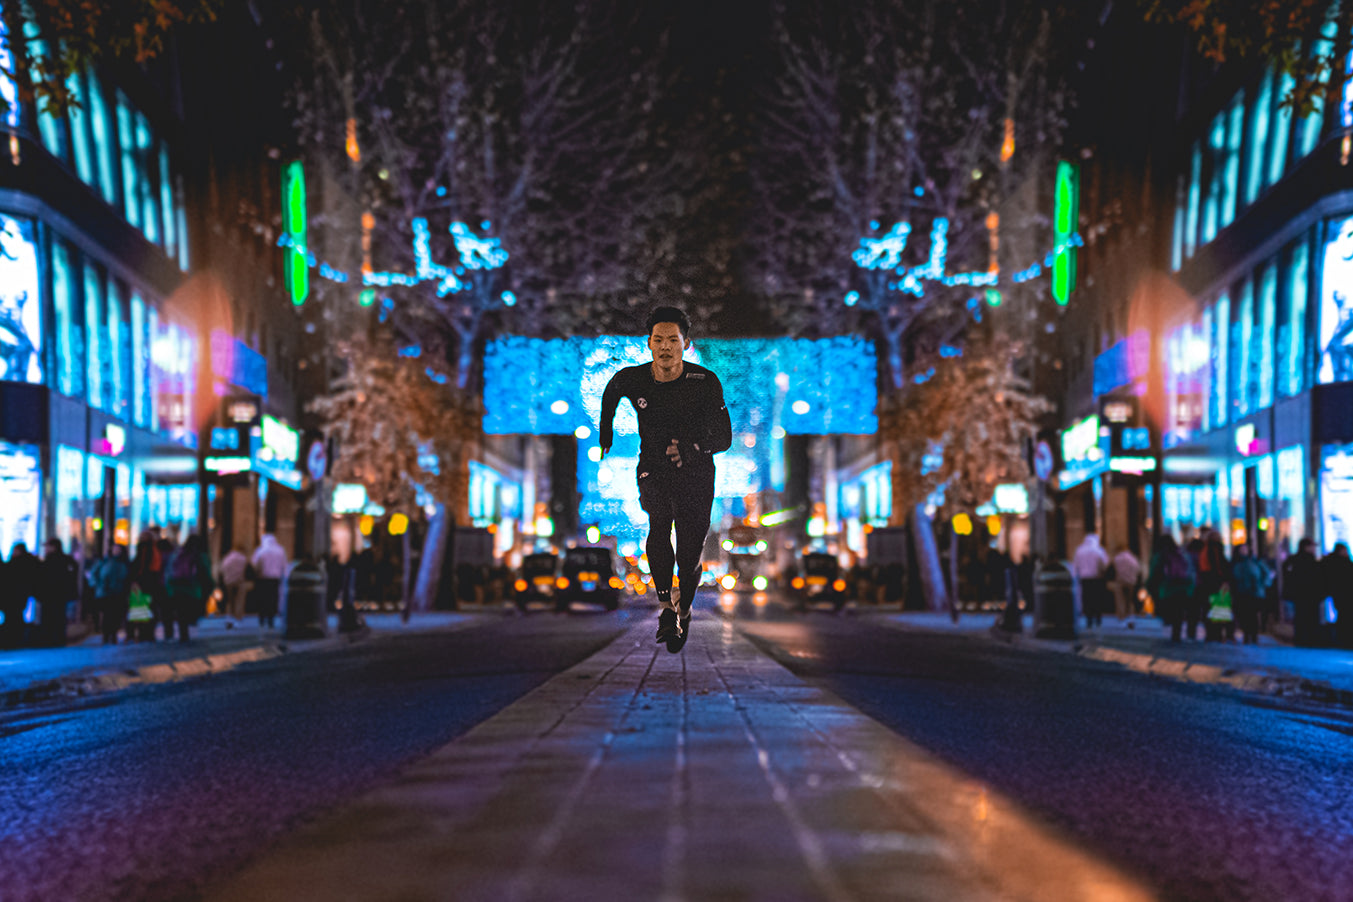 Man sprinting in street late at night. Streets well lit with neon lights.